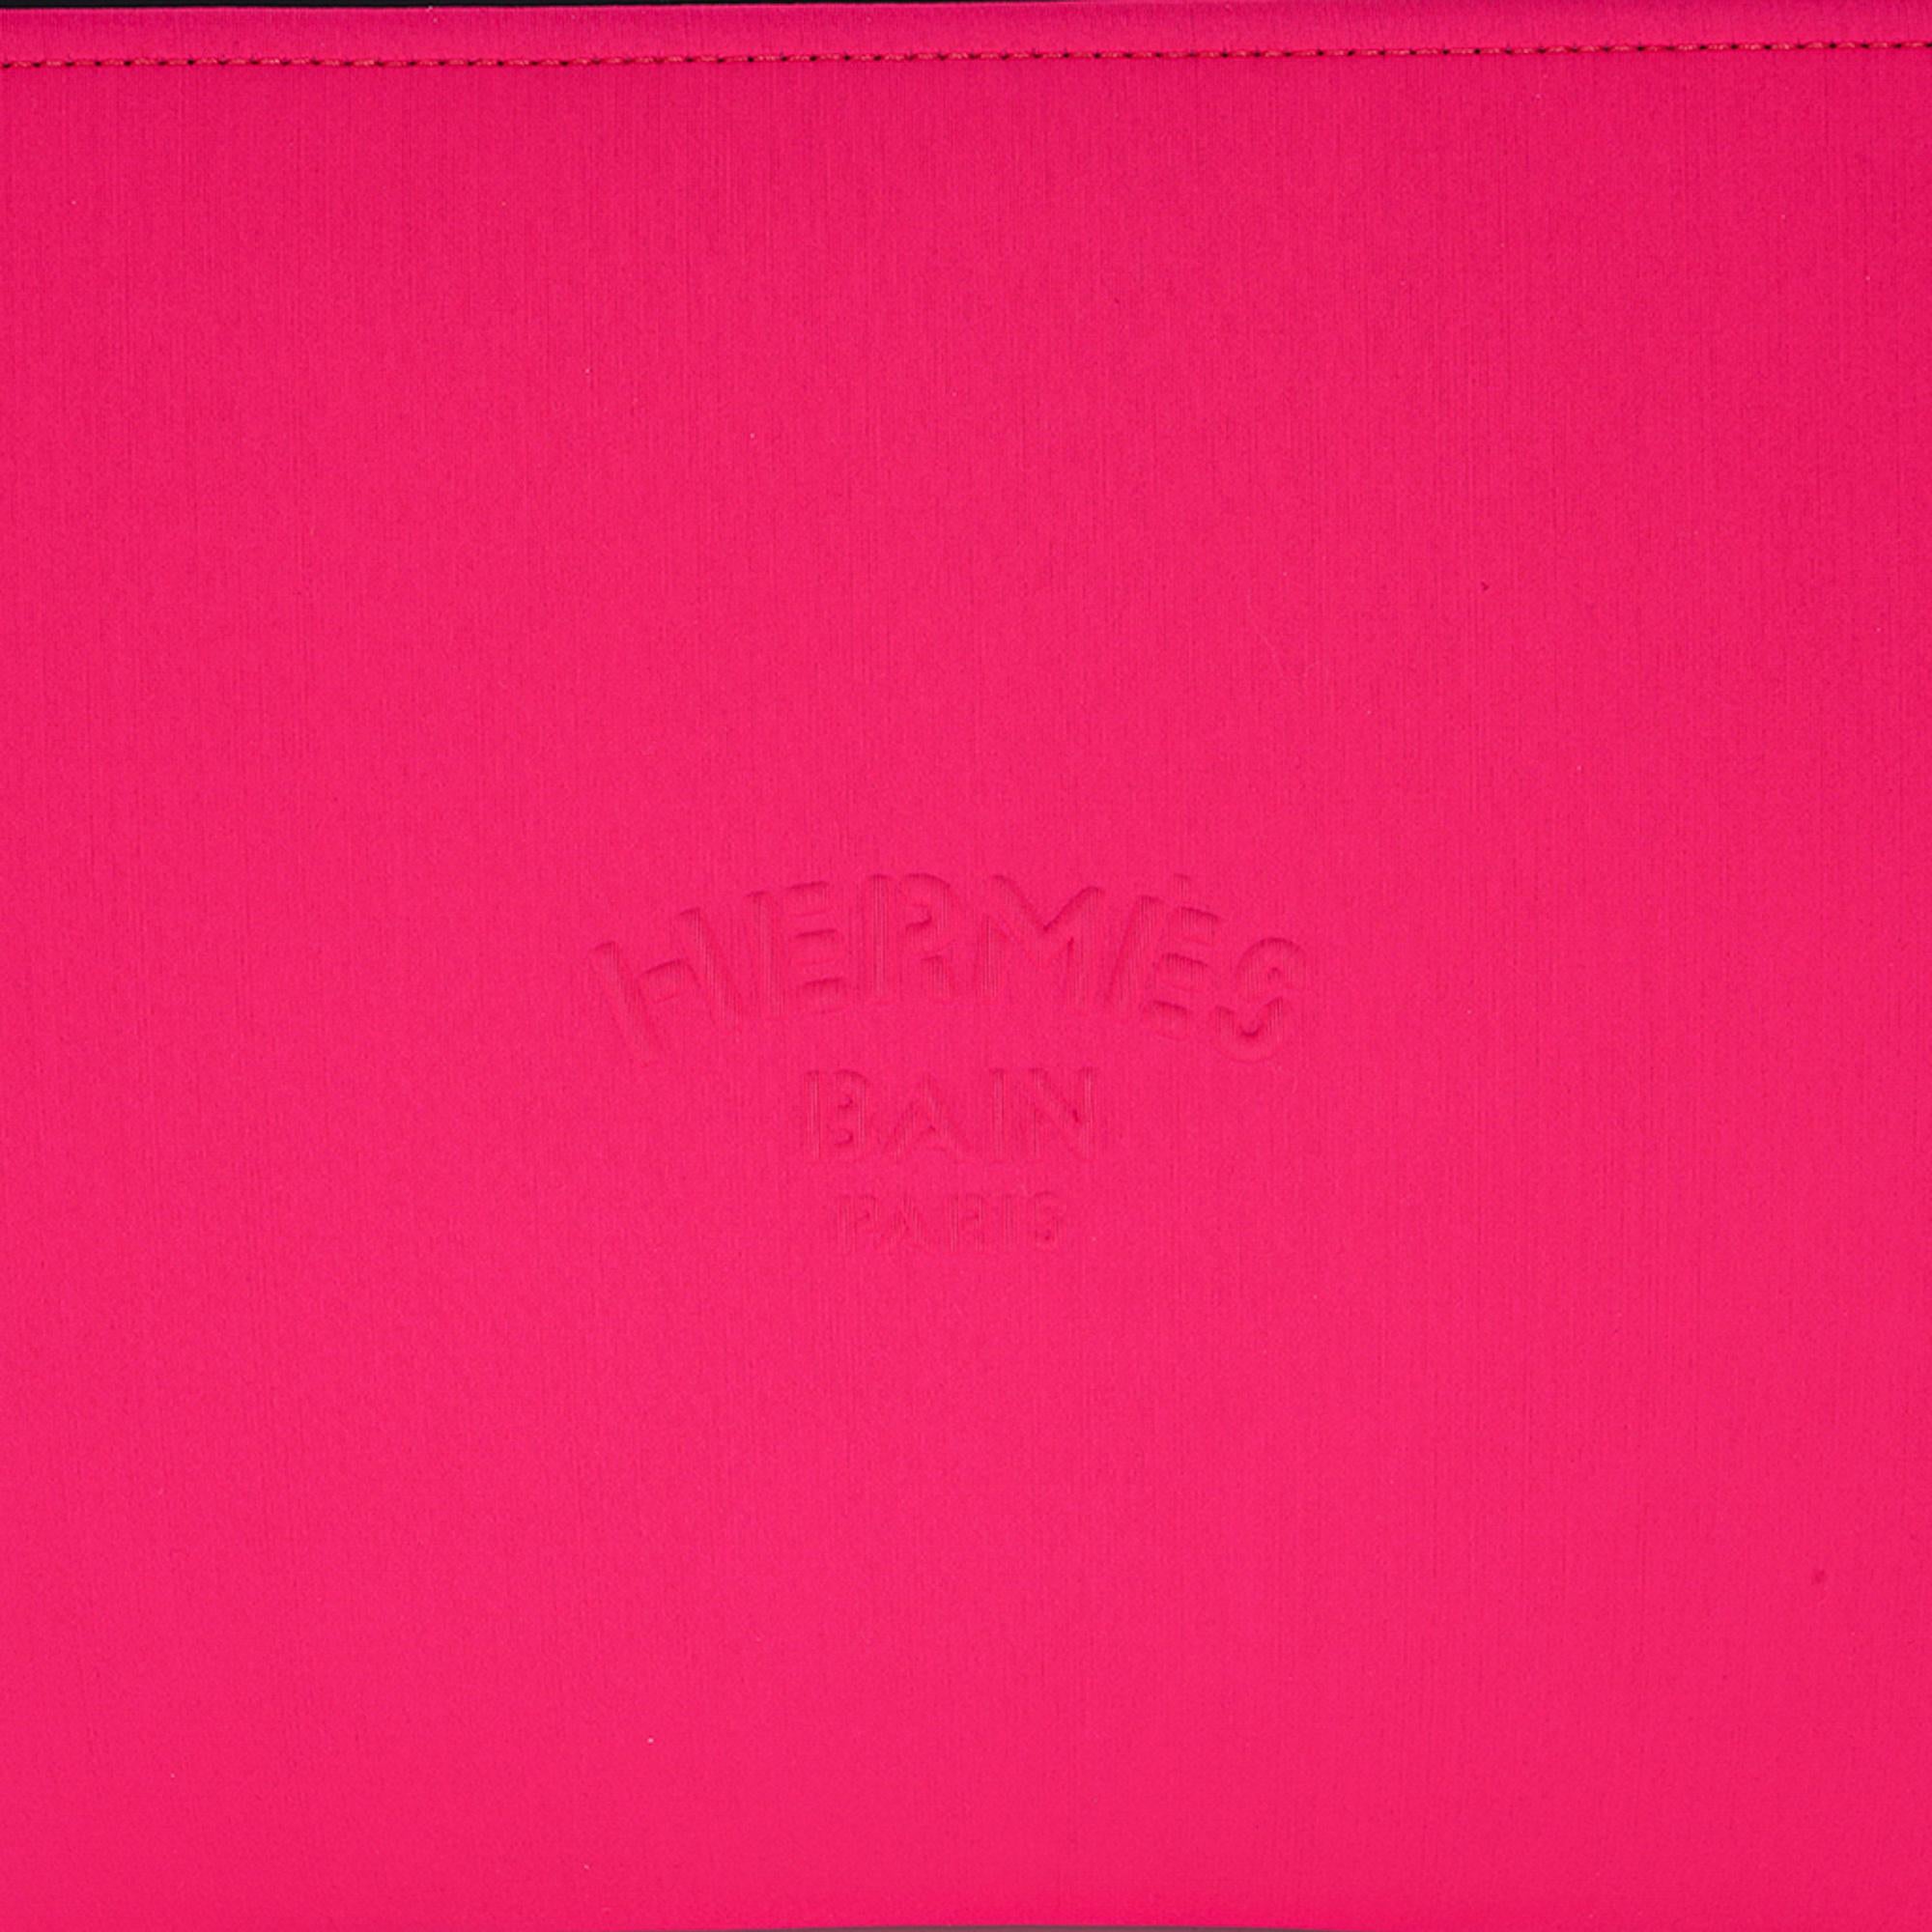 Mightychic offers a guaranteed authentic Hermes Neobain case featured in the large model.
Beautiful spring Rose Blogger pink is richly saturated with Hermes Bain Paris embossed in front.
Top black zipper with leather zipper toggle.
Water repellent